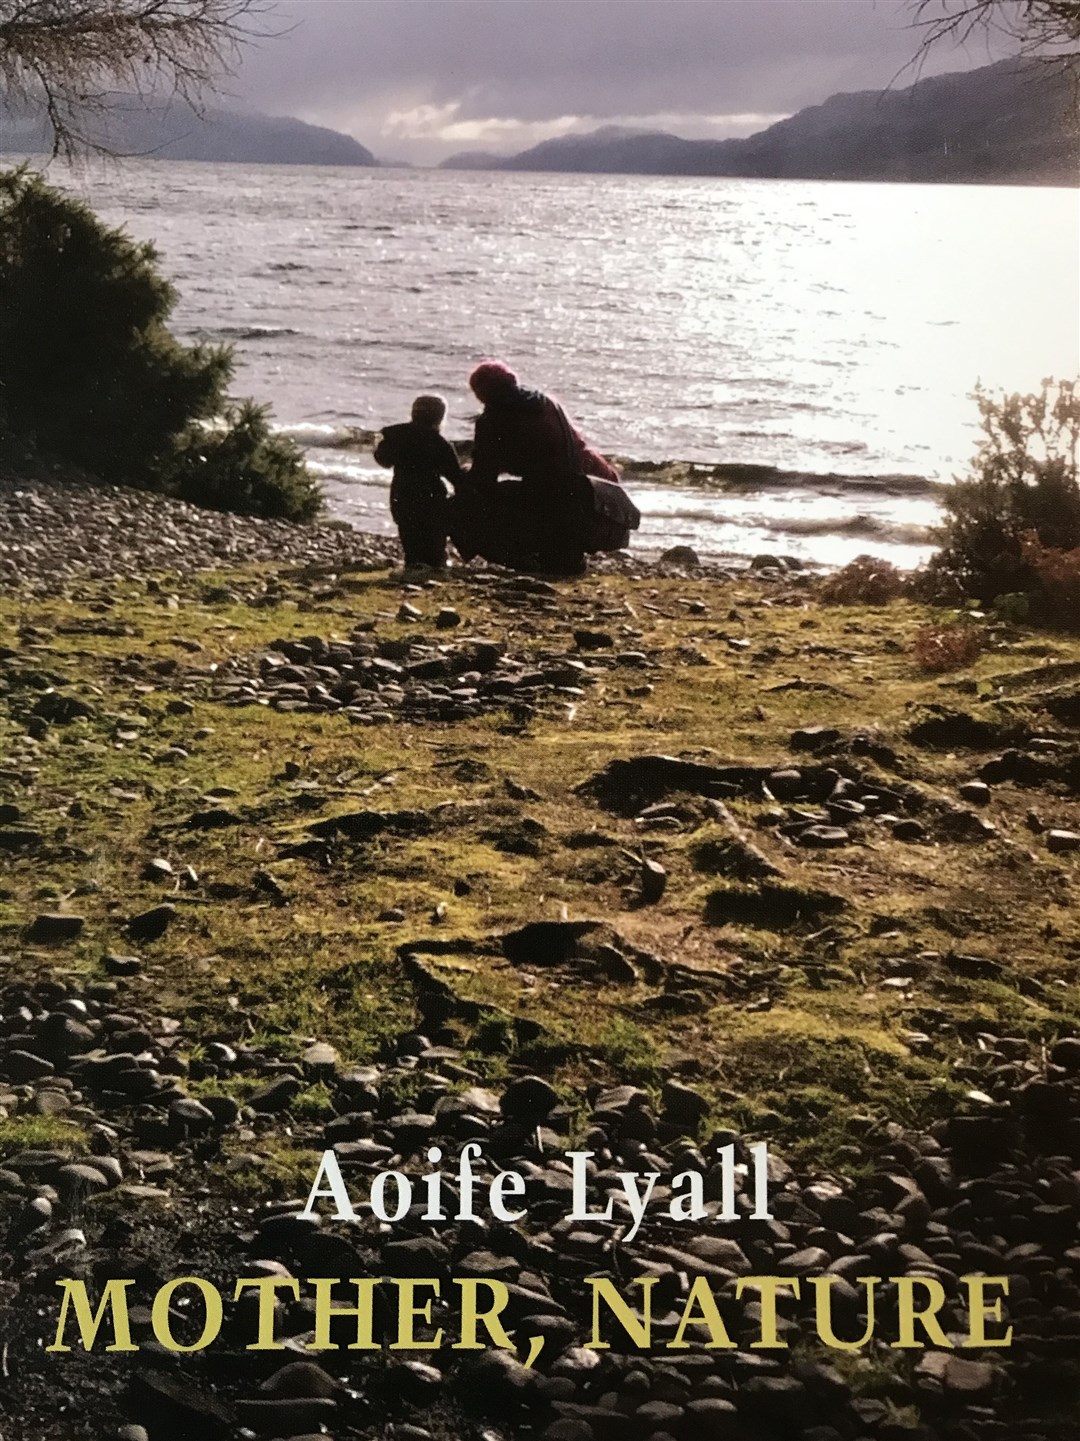 Mother, Nature - Aoife Lyall's Saltire-nominated poetry collection.